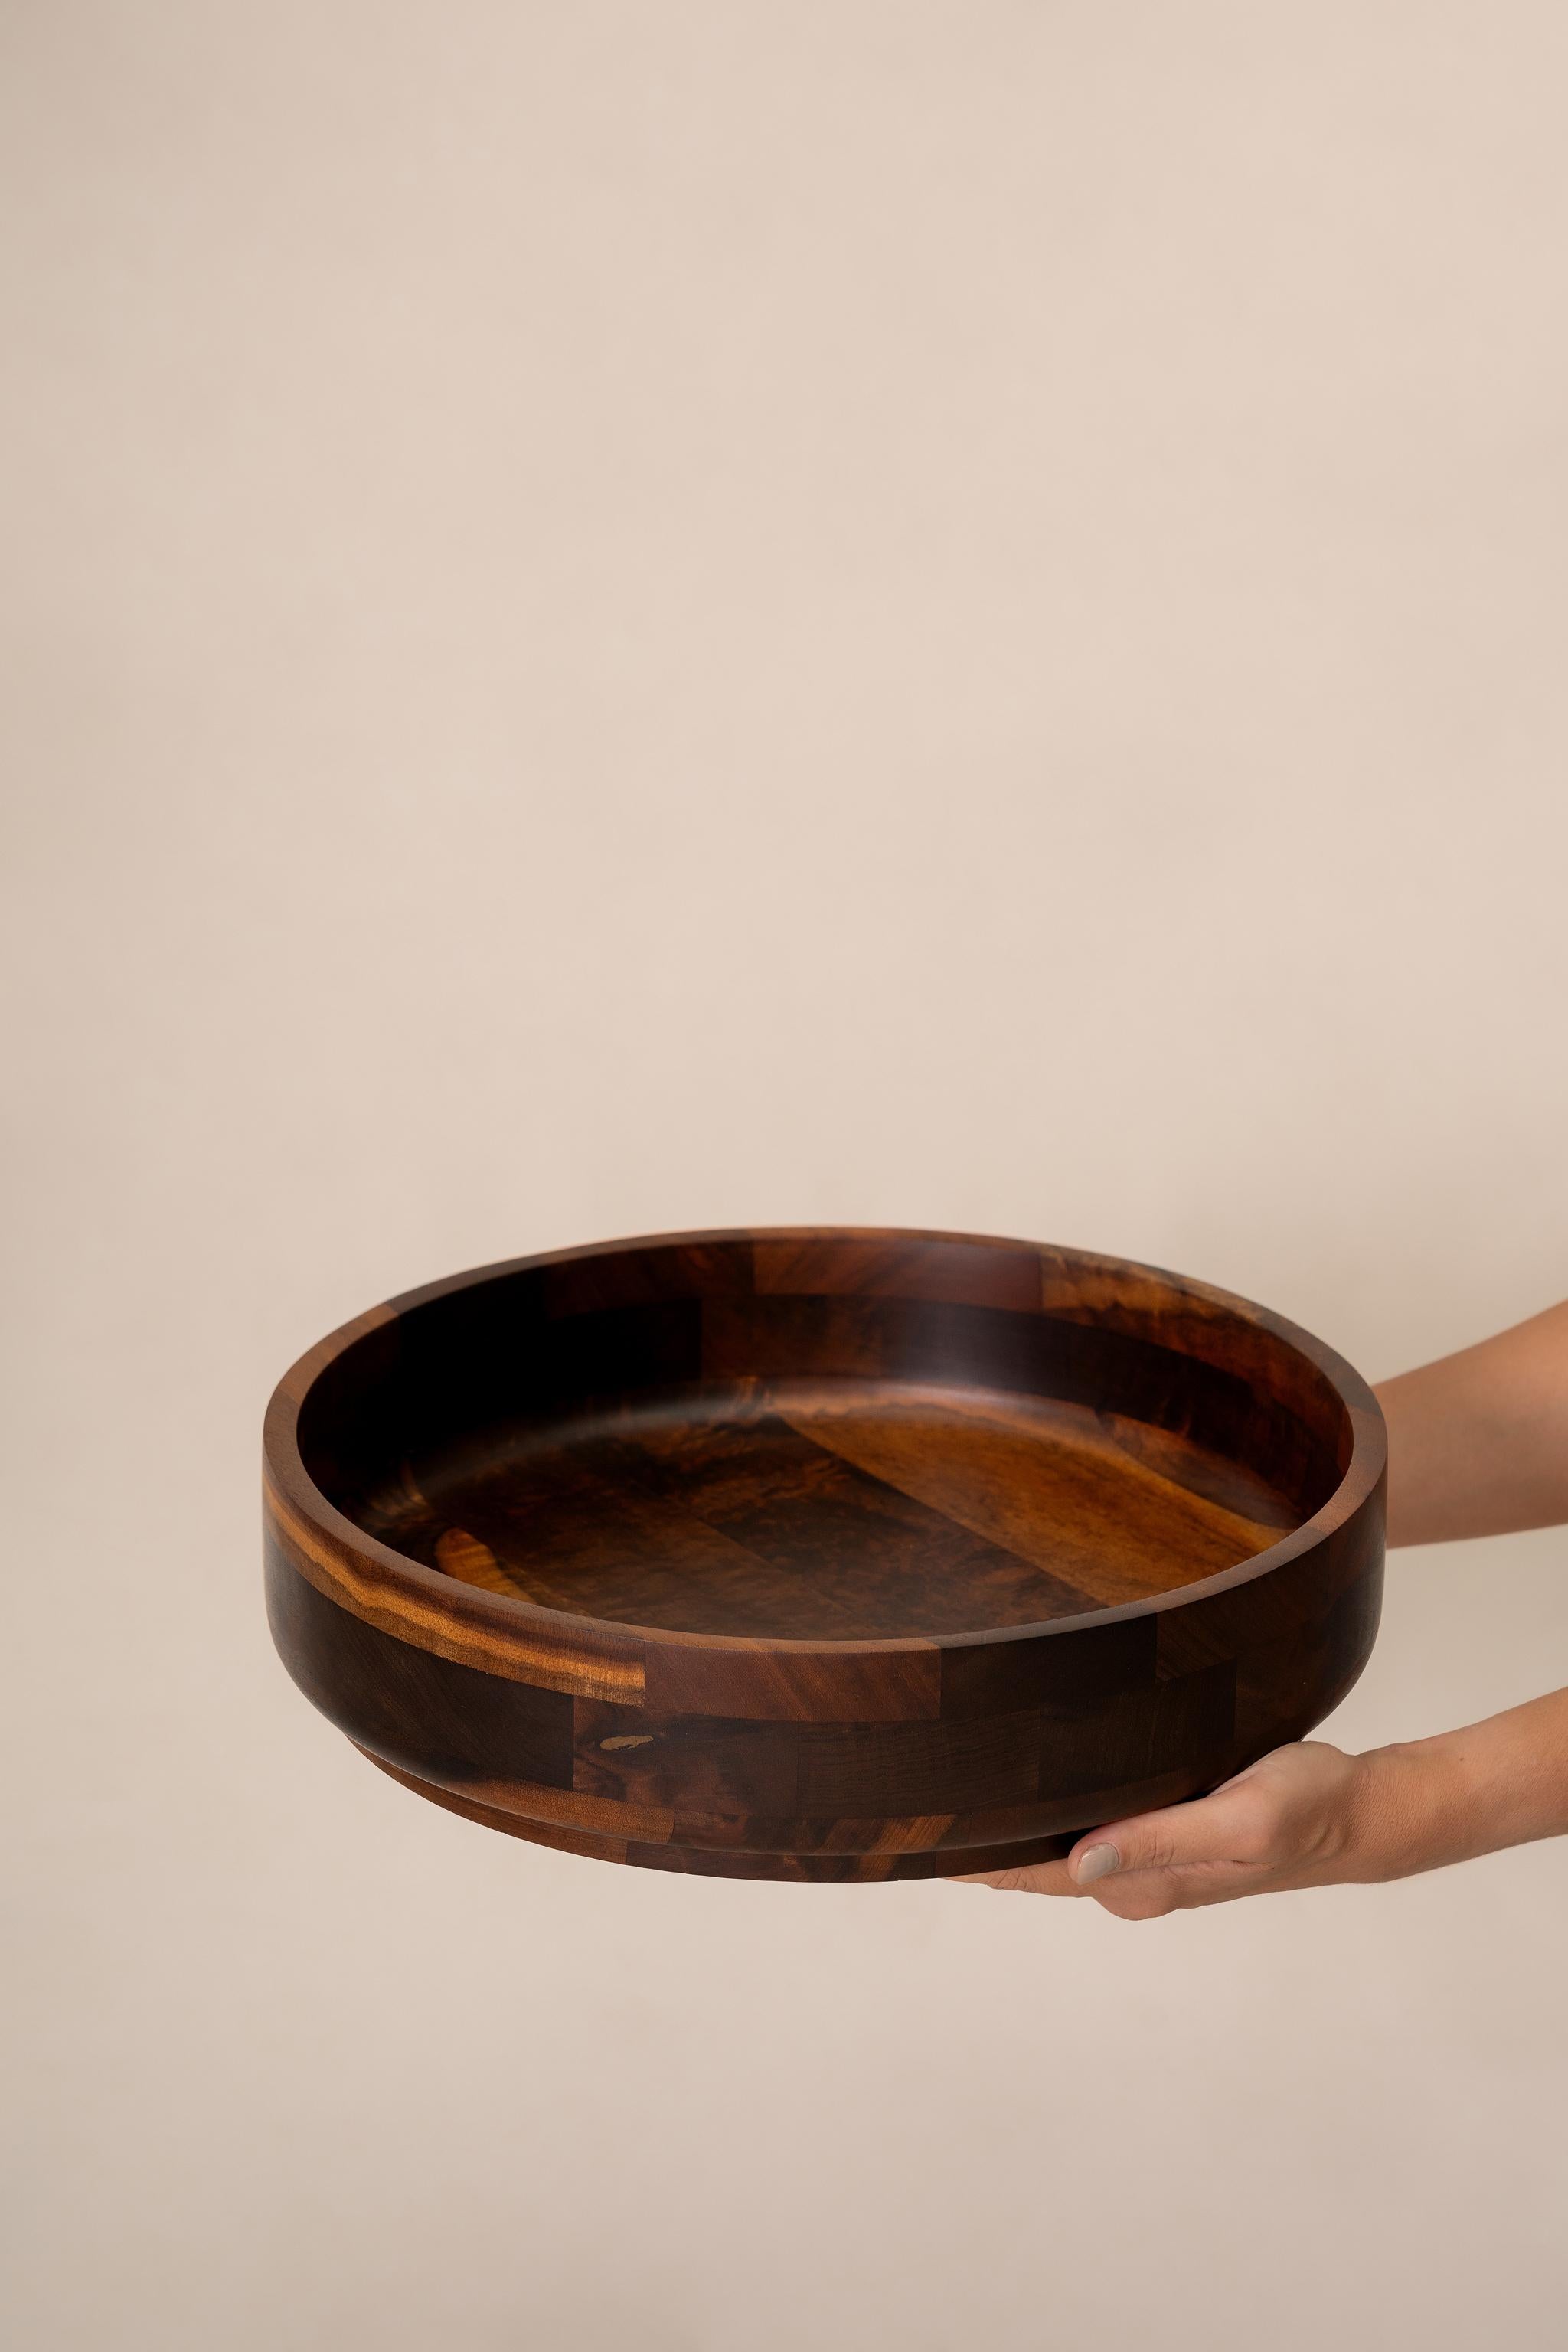 Brazilian Midcentury Centerpiece Bowl in Noble Wood, c. 1970 In Good Condition For Sale In Rio De Janeiro, RJ